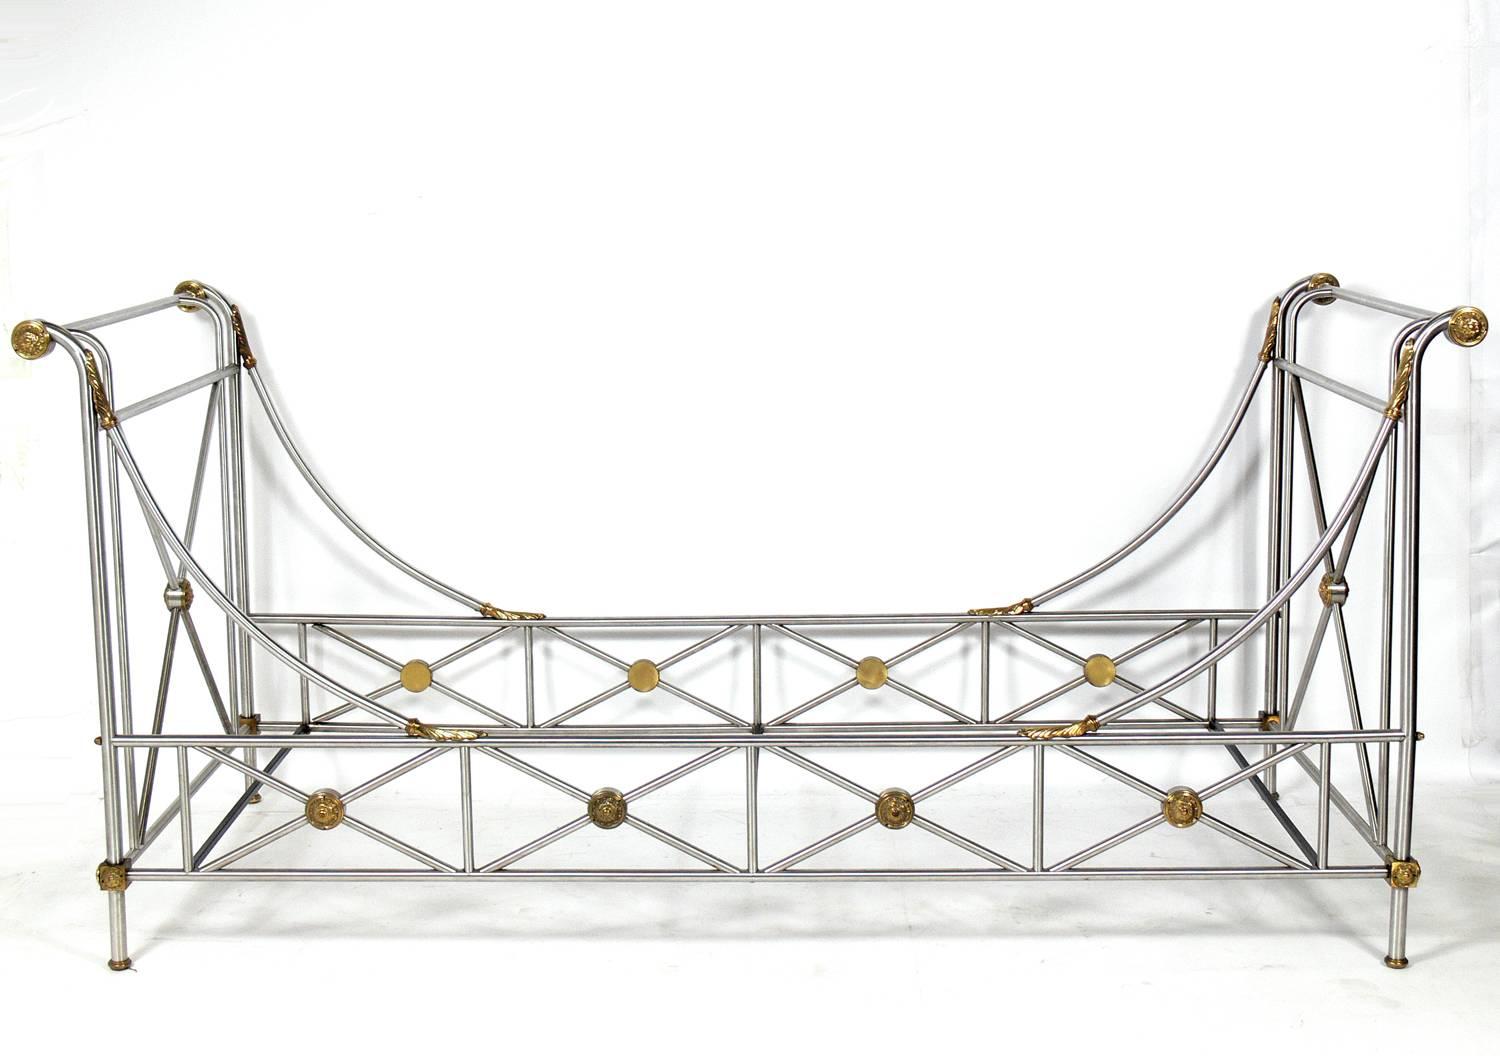 Neoclassical campaign style daybed, designed by Maison Jansen, circa 1970s. It is executed in steel with bronze fittings. Another example, from the collection of Reed Krakoff, creative director of Coach, was featured in Elle Decor, September 2006,